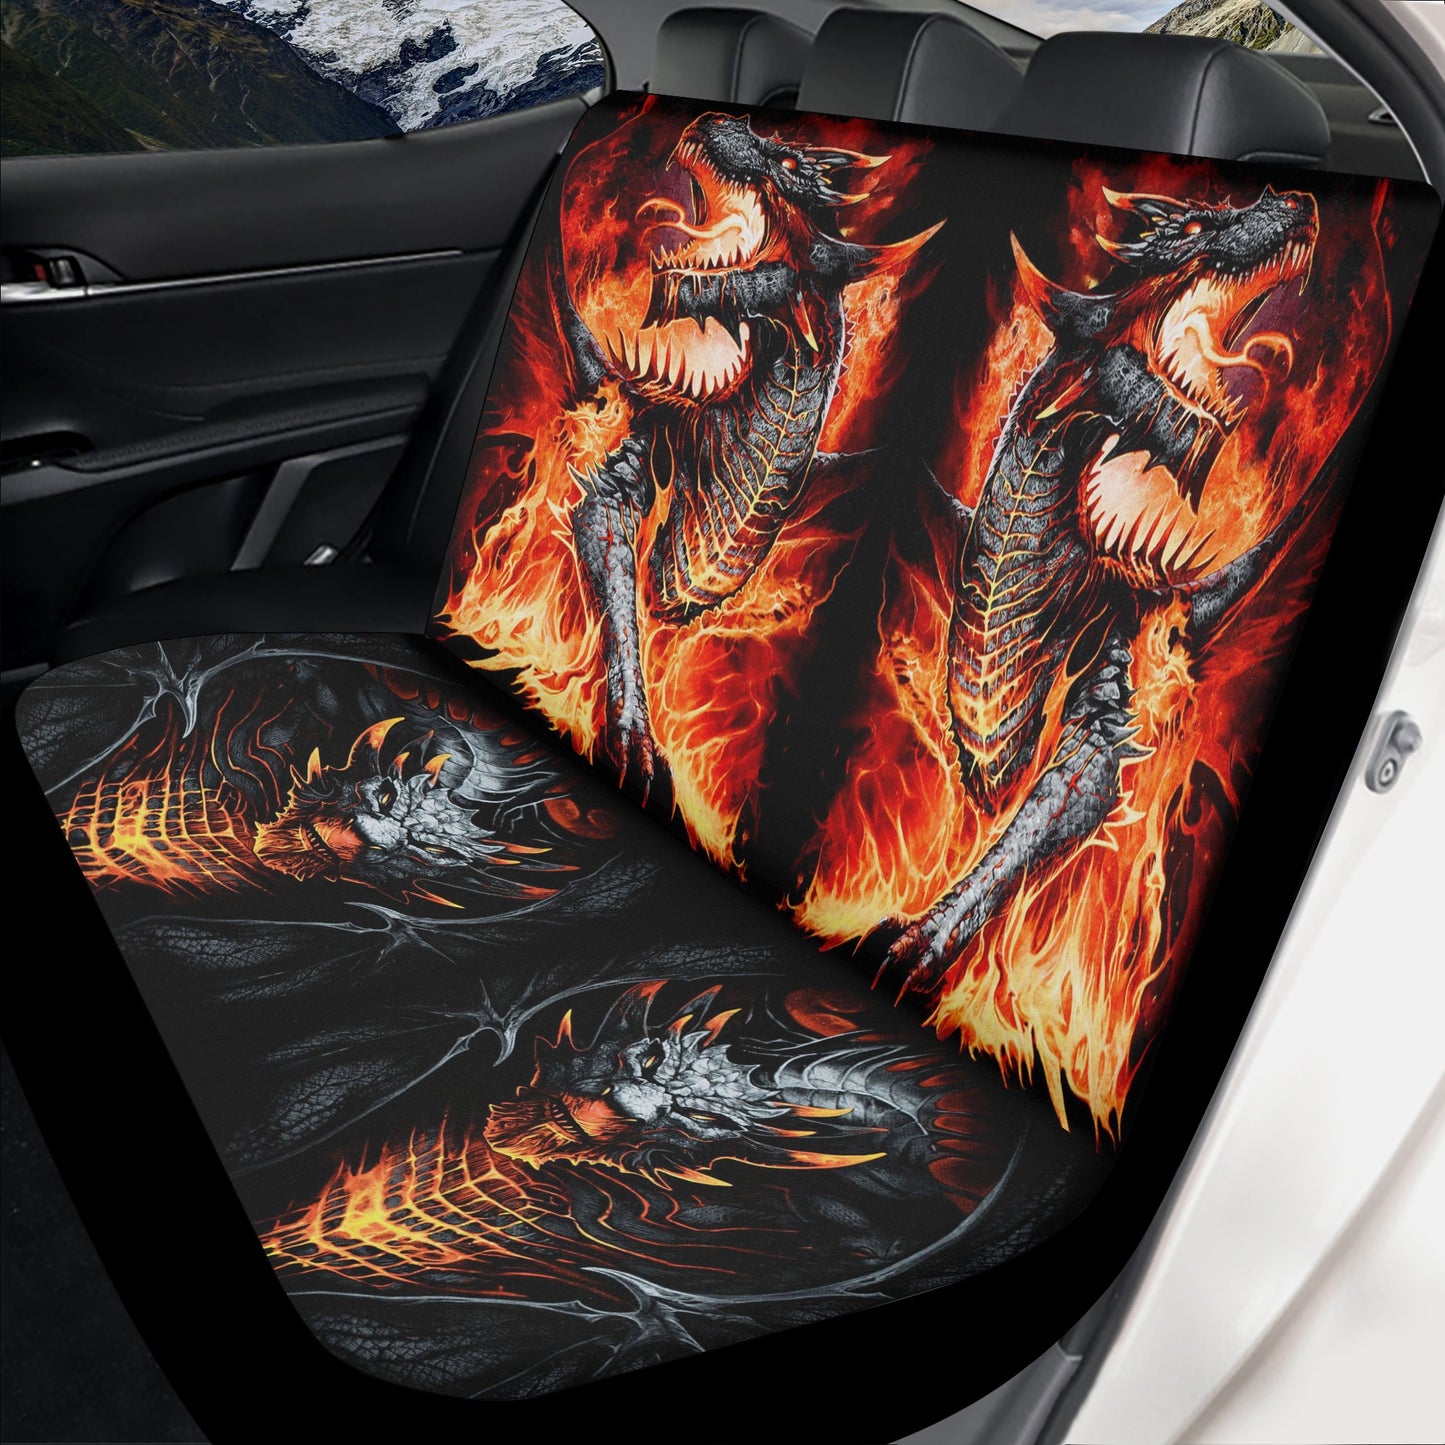 Floral skull seat cover for truck, horror car seat protector cover, gothic skull car tool, biker skull car mat, flame skull car protector, c